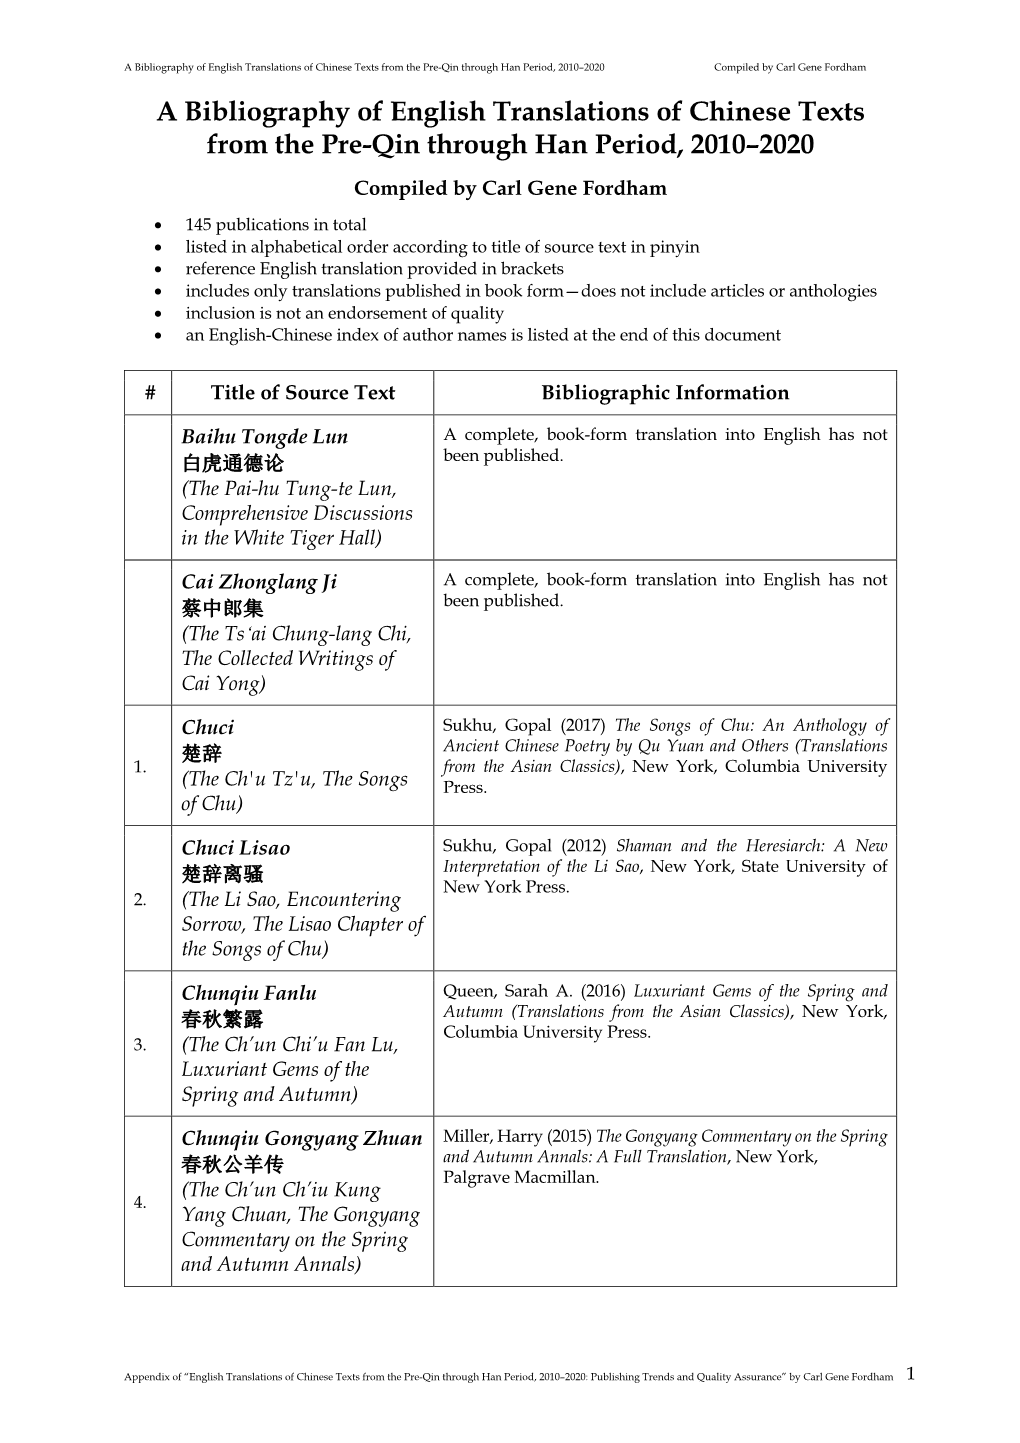 A Bibliography of English Translations of Chinese Texts from the Pre-Qin